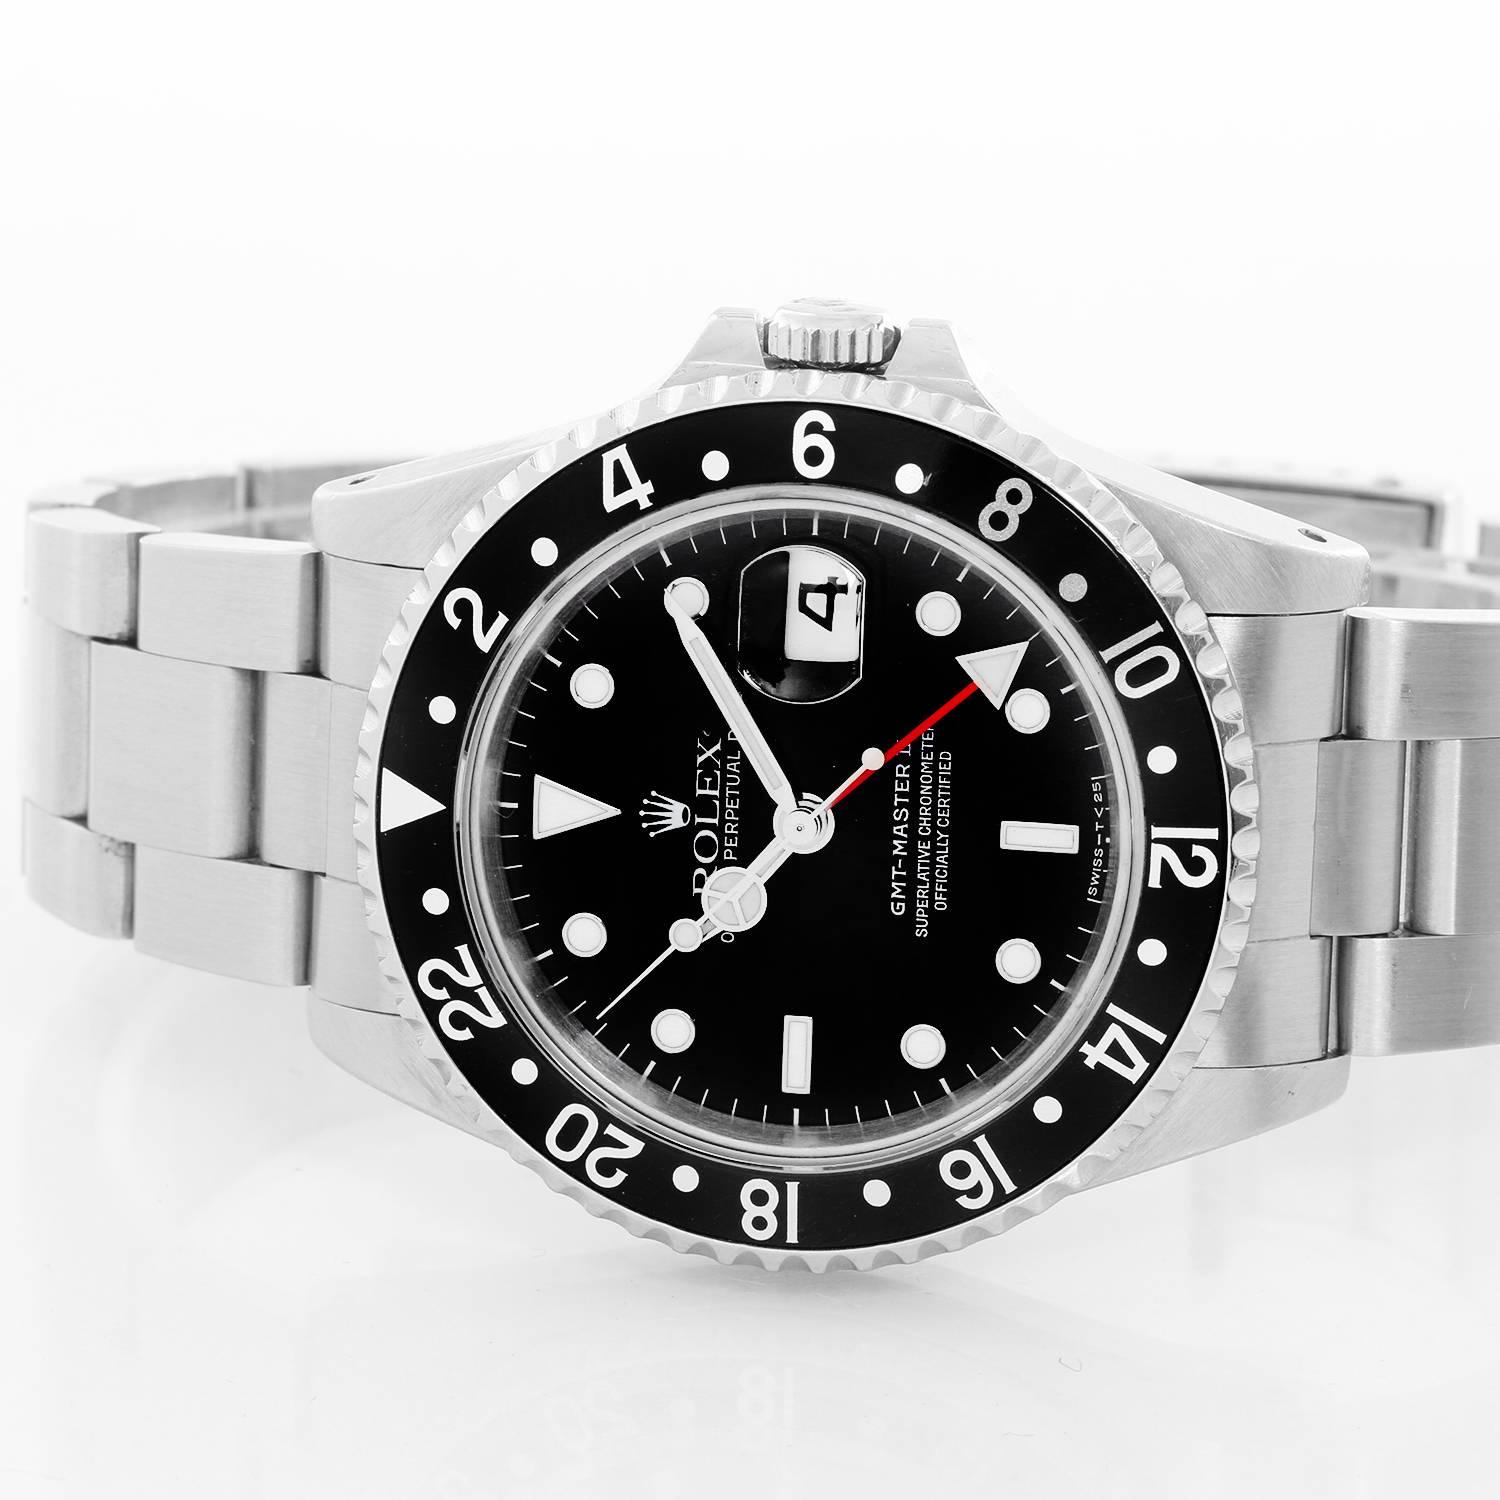 Men's Rolex GMT-Master II Watch 16710 -  Automatic winding, 31 jewels, Quickset, sapphire crystal. Stainless steel case; rotating bezel with red/blue bezel (40mm diameter). Black dial with luminous style markers. Stainless steel Oyster bracelet.